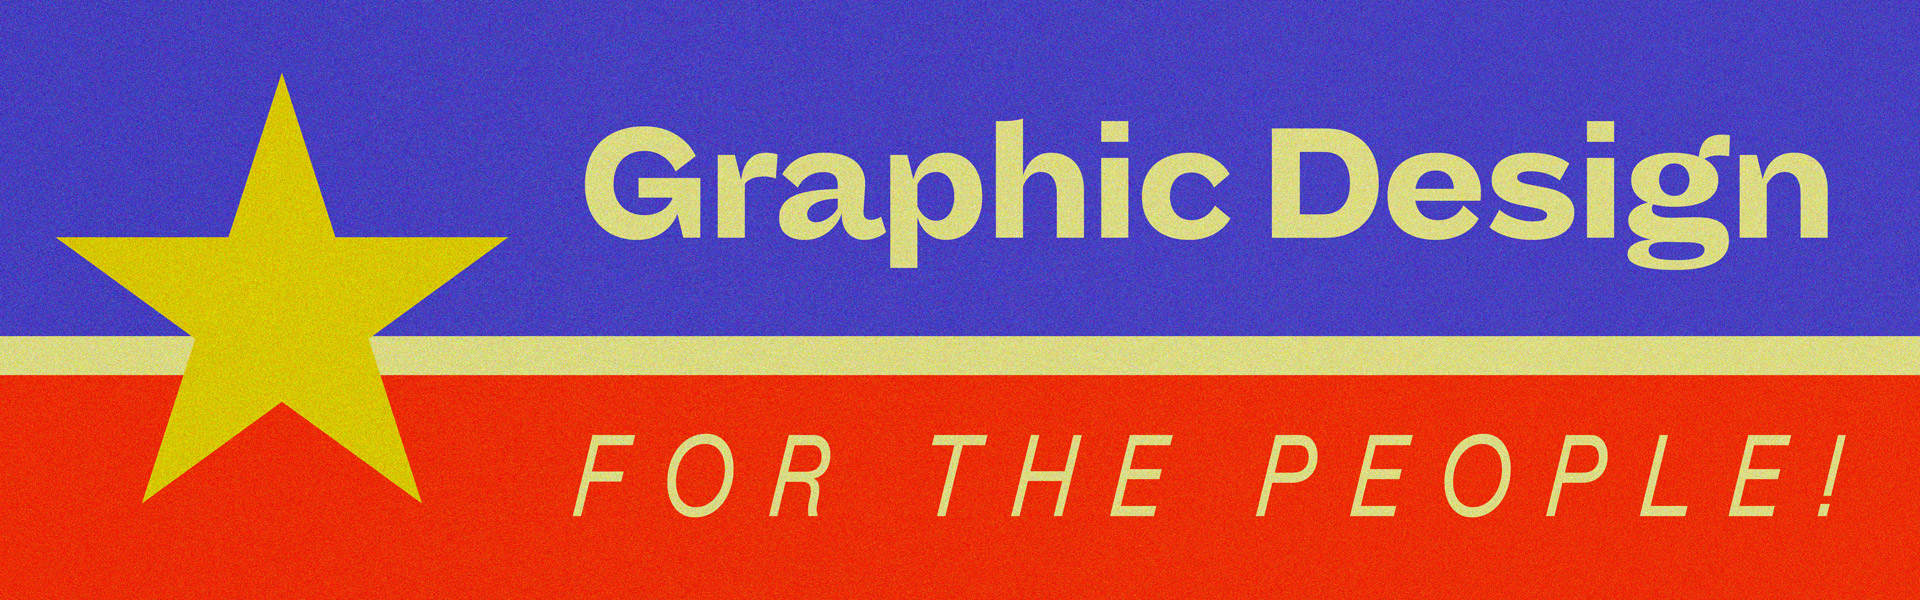 graphic design for the people!